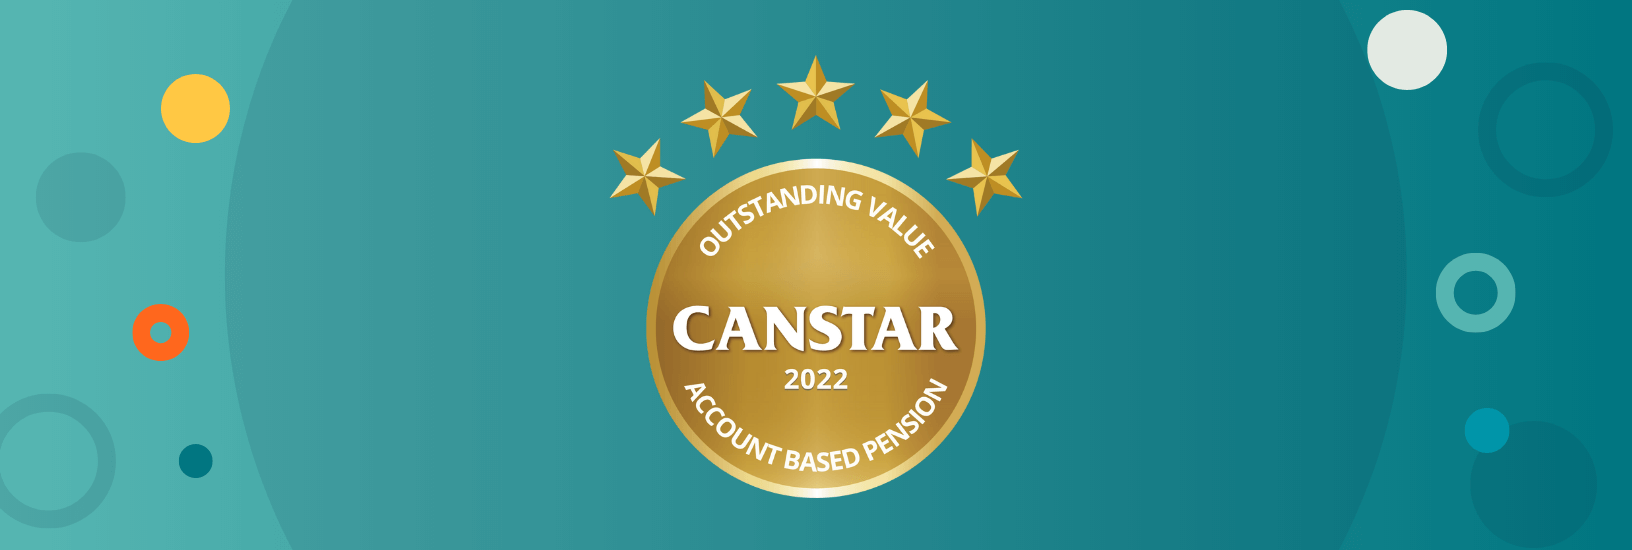 2022-account-based-pension-star-ratings-and-awards-canstar